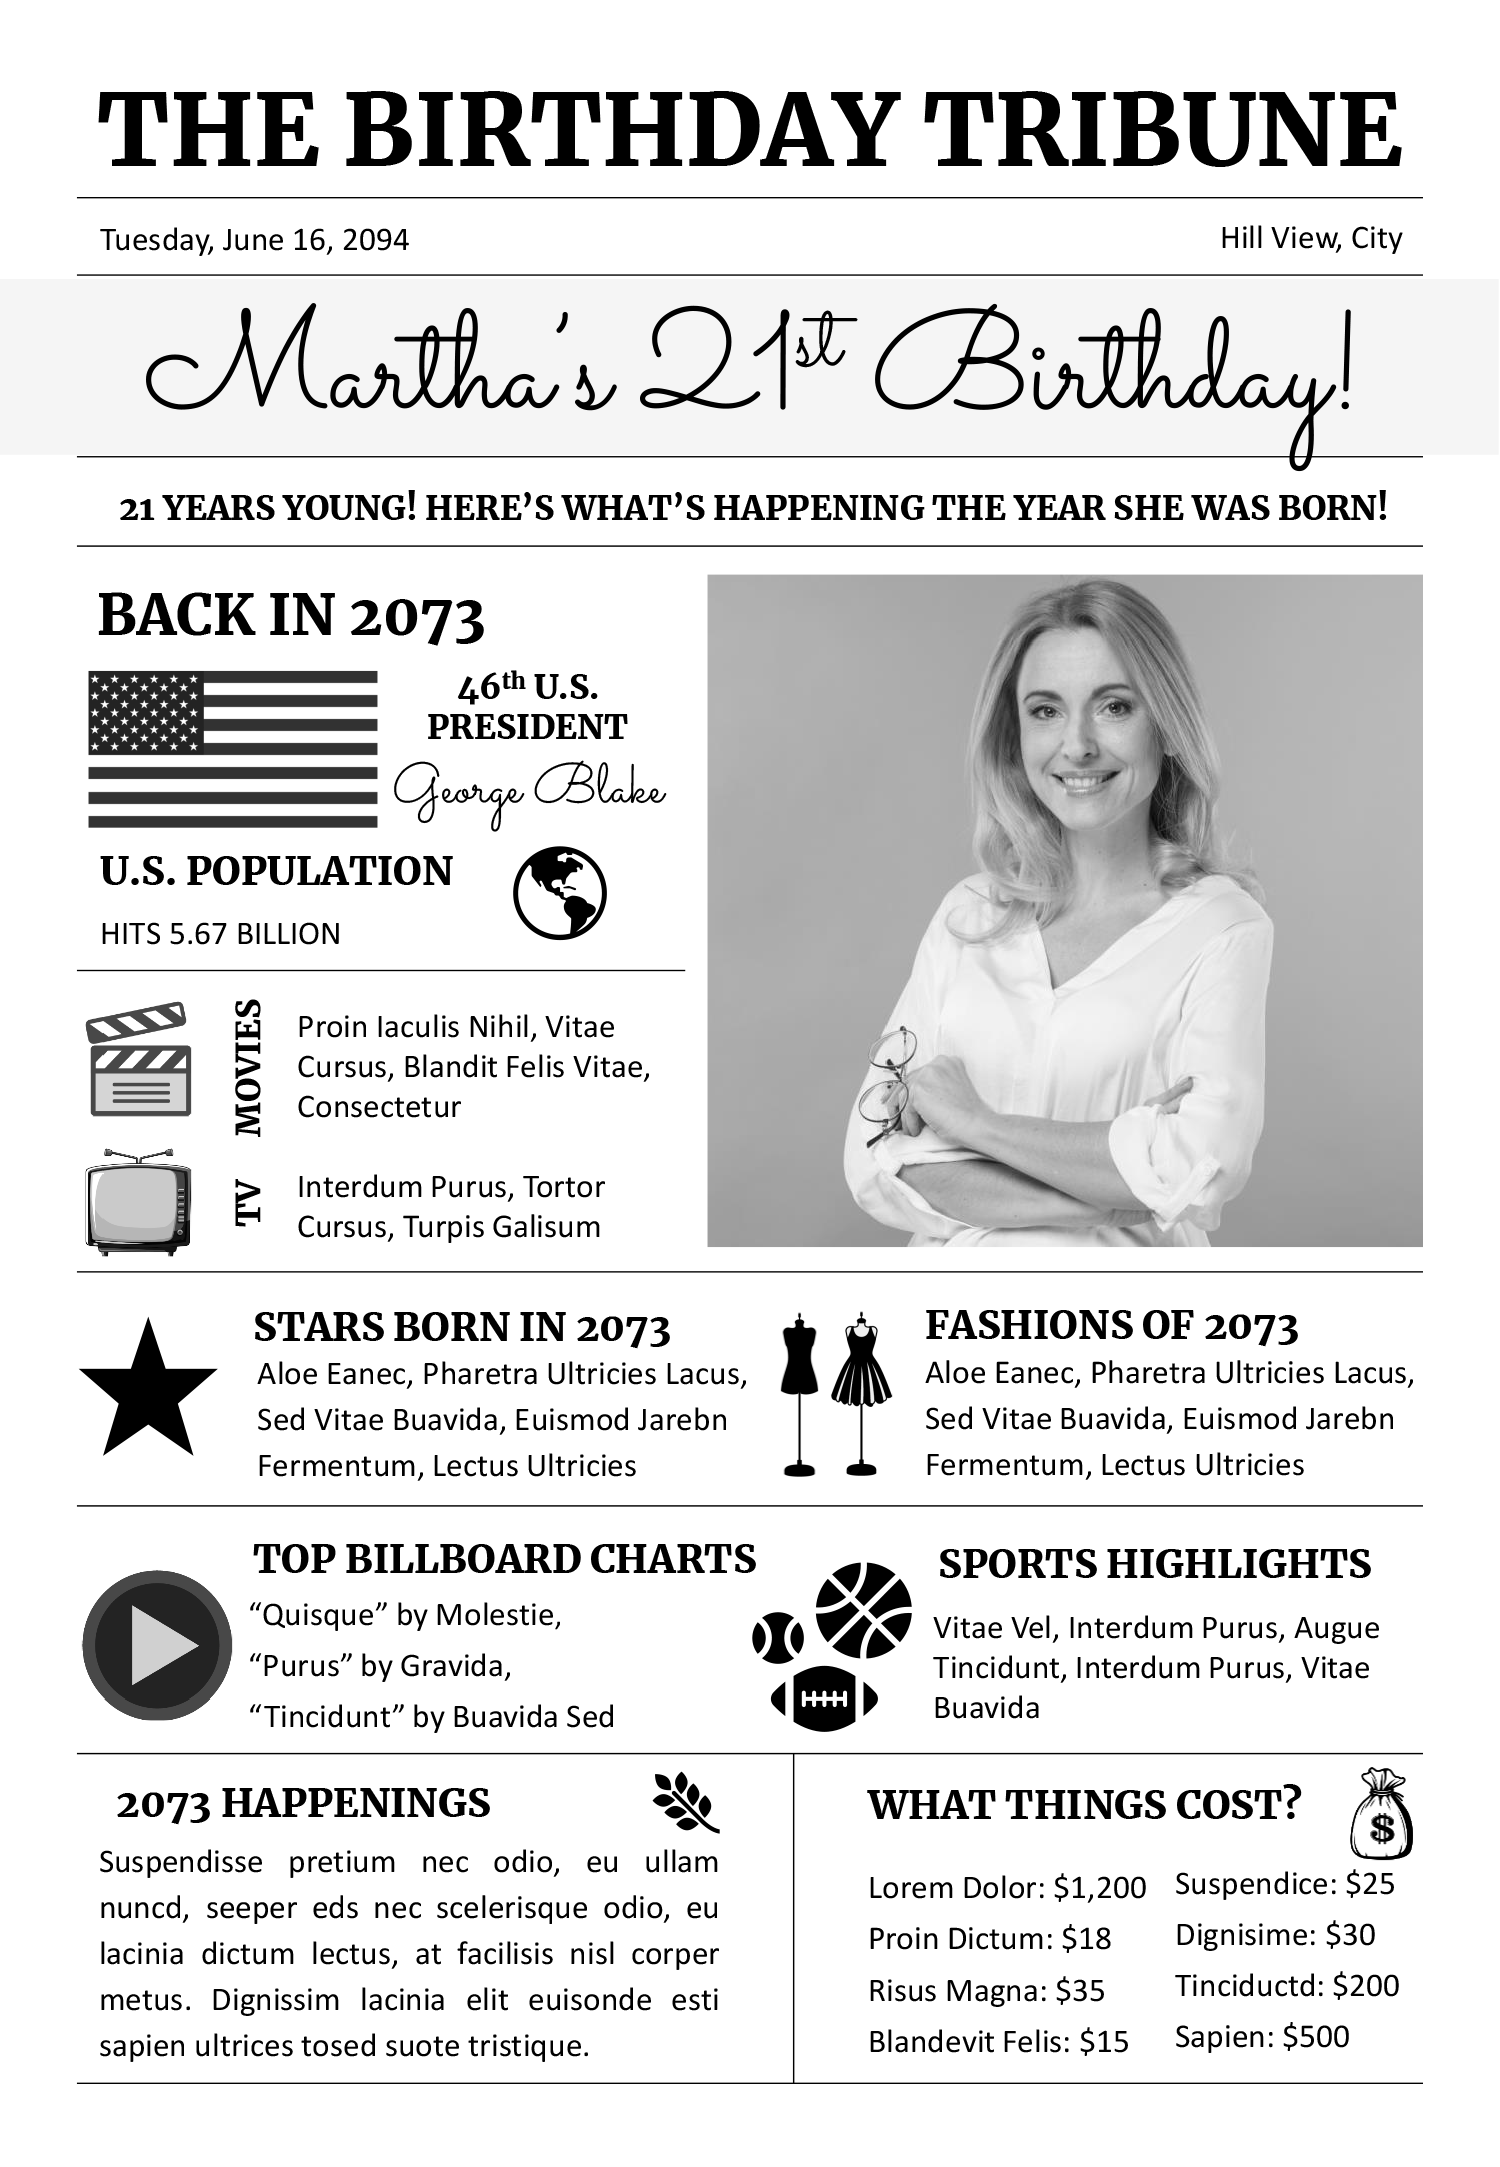 Black and White Birthday Newspaper Poster Template - Front Page